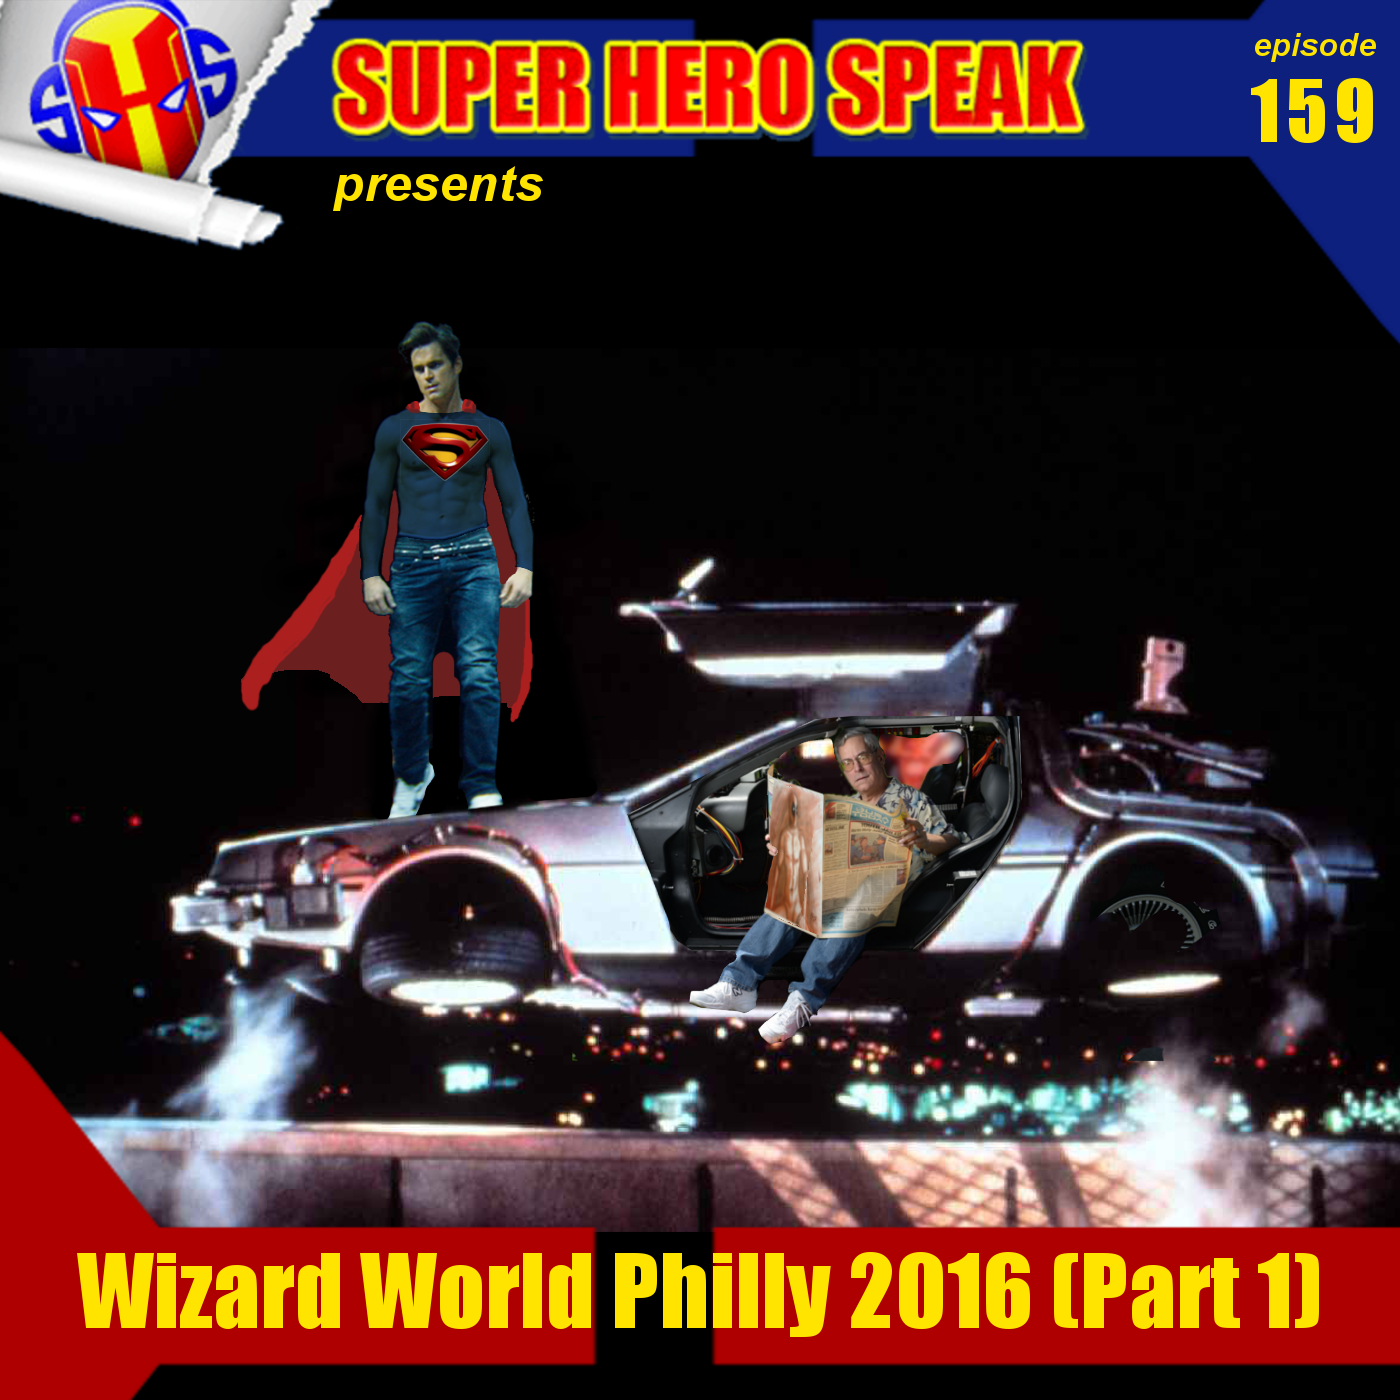 #159: Wizard World Philly 2016 Part 1